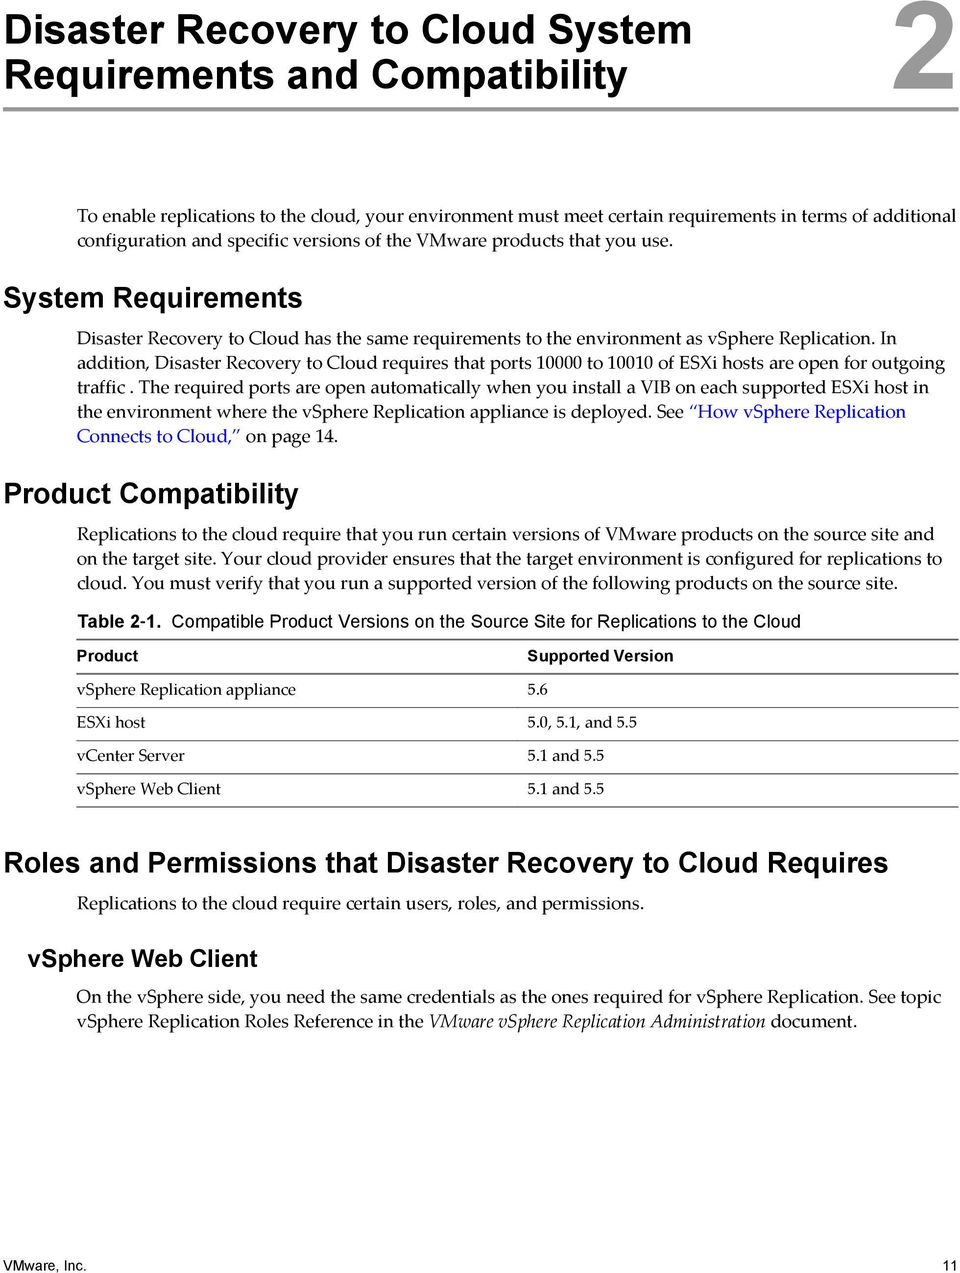 In addition, Disaster Recovery to Cloud requires that ports 10000 to 10010 of ESXi hosts are open for outgoing traffic.